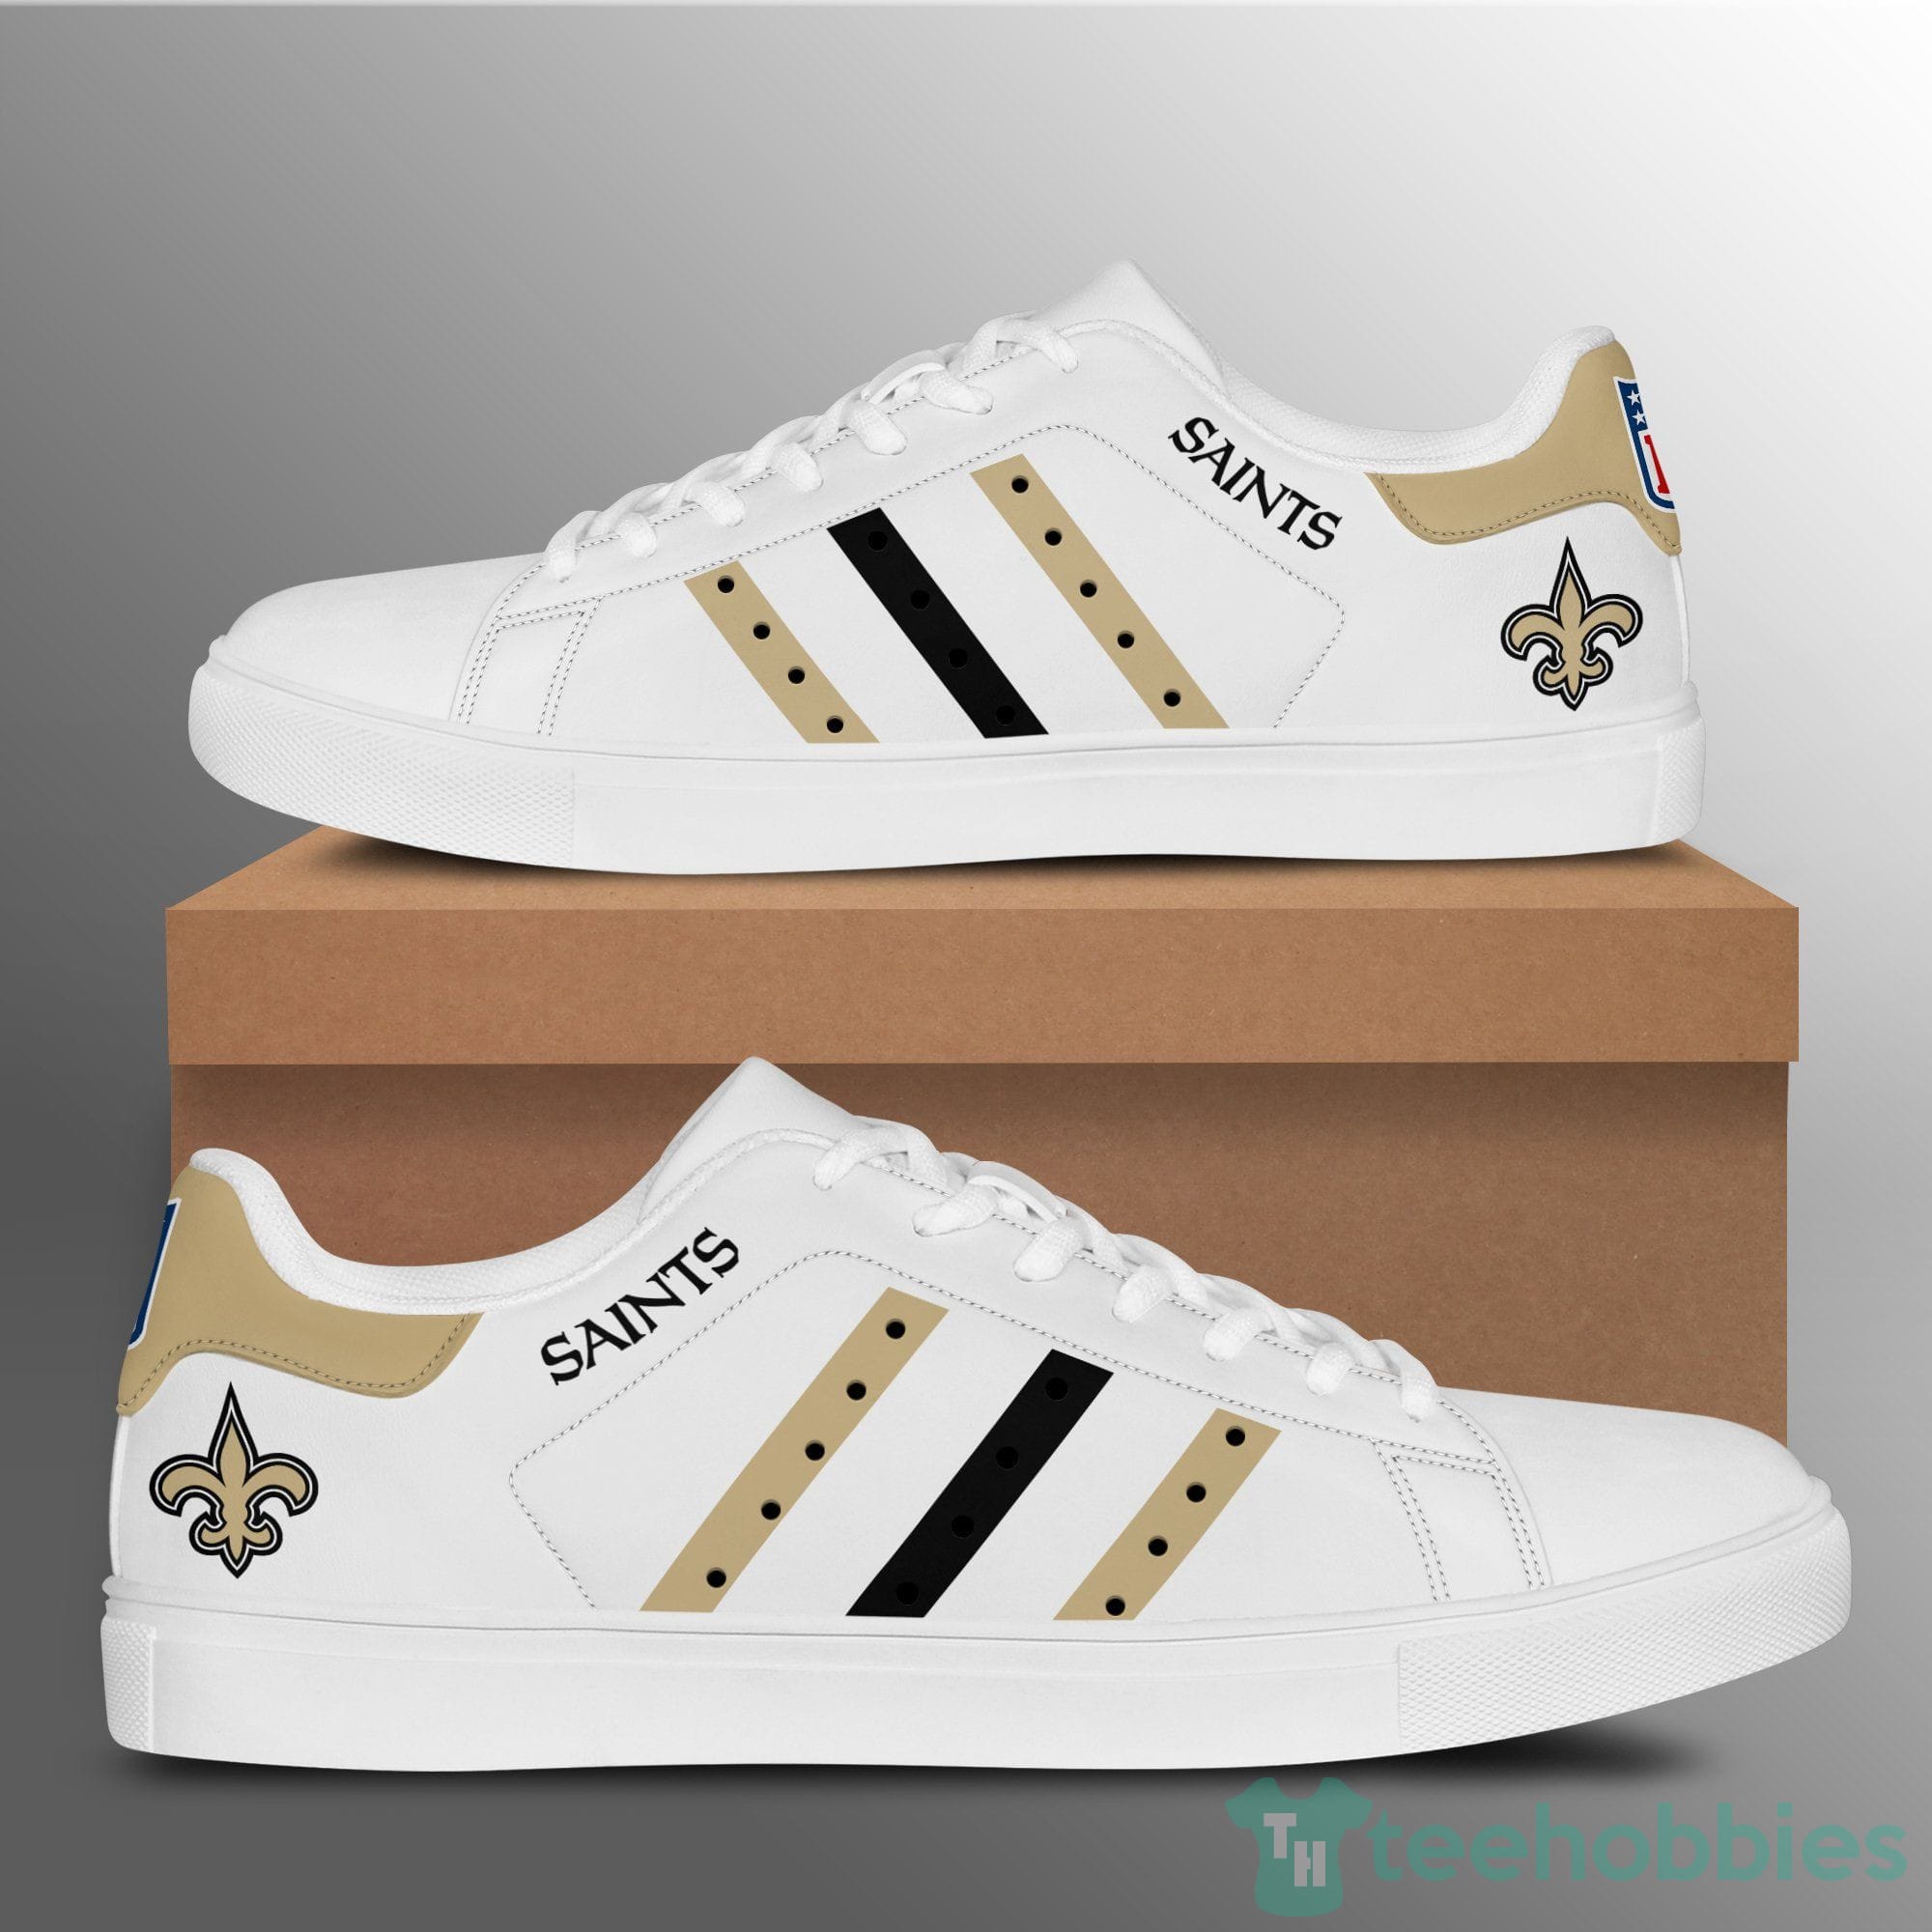 New Orleans Saints White Low Top Skate Shoes Product photo 1